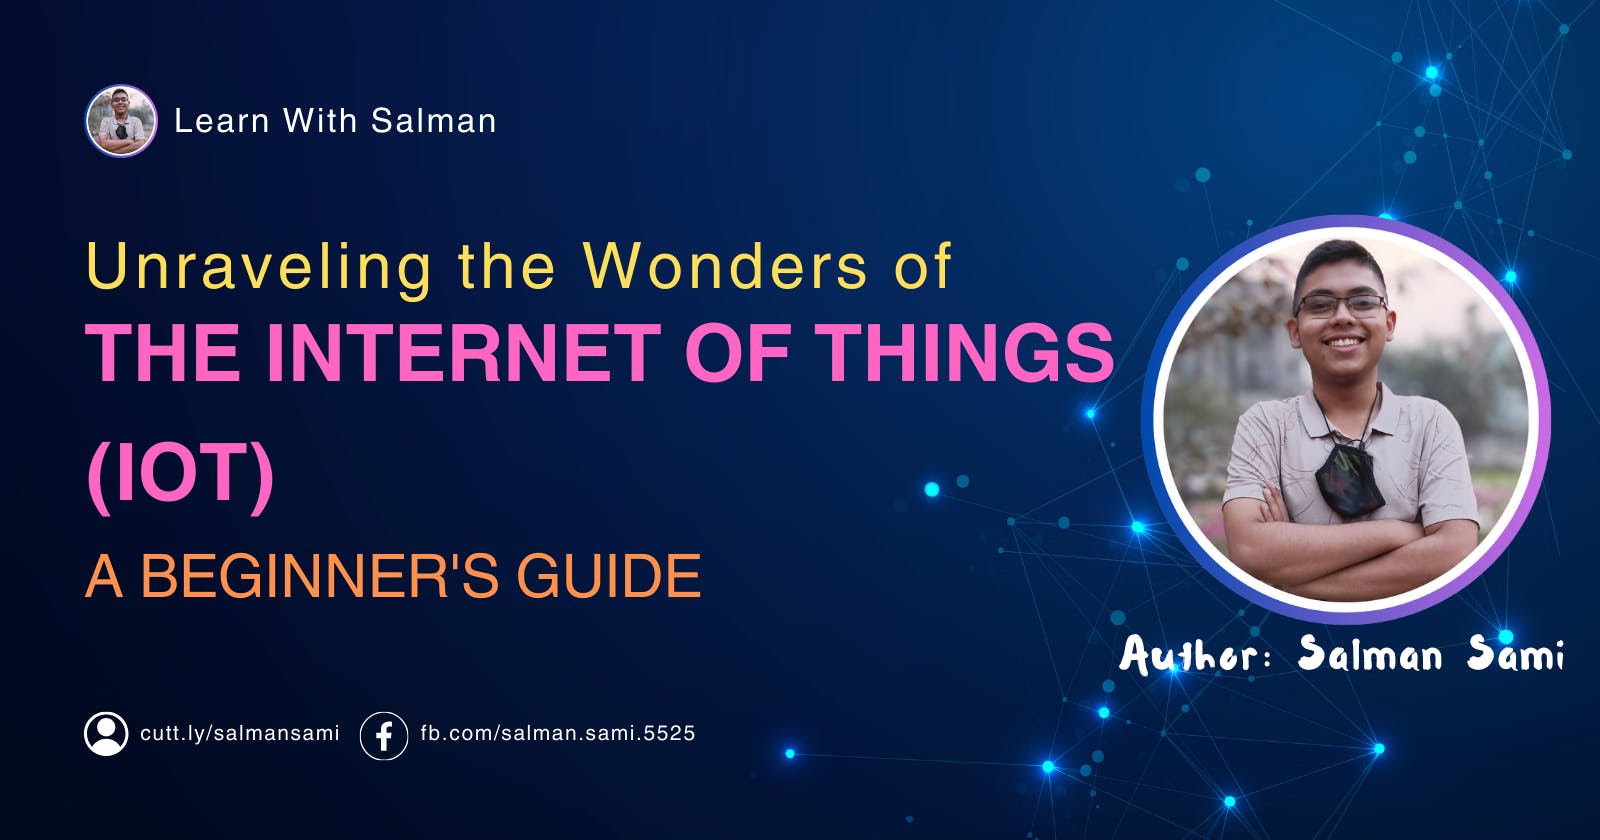 Unraveling the Wonders of the Internet of Things (IoT): A Beginner's Guide